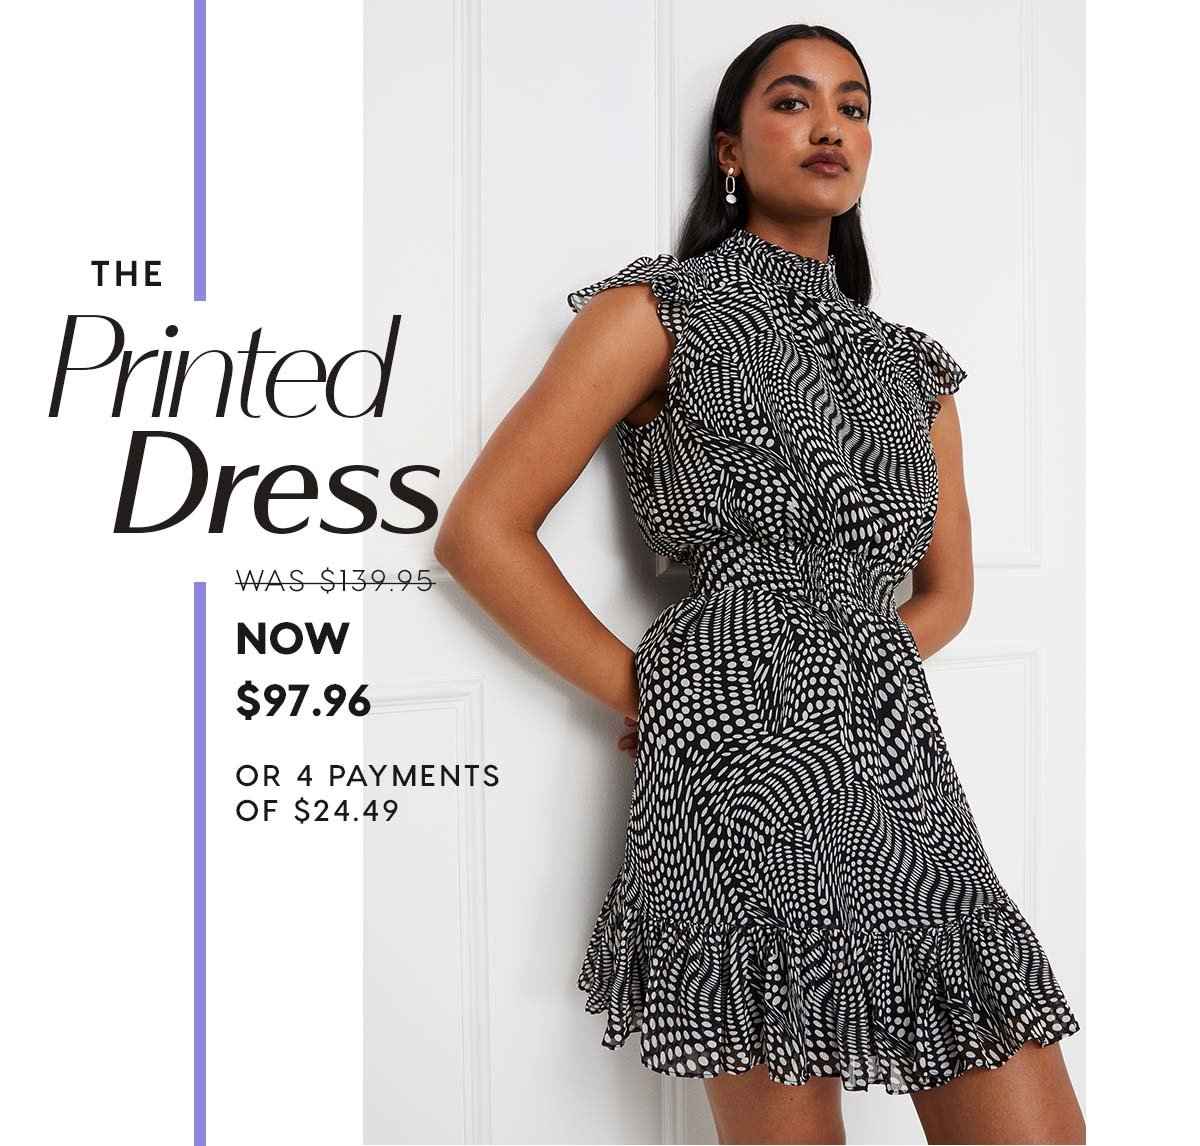 The Printed Dress. WAS $139.95 NOW  $97.96 or 4 payments of $24.49